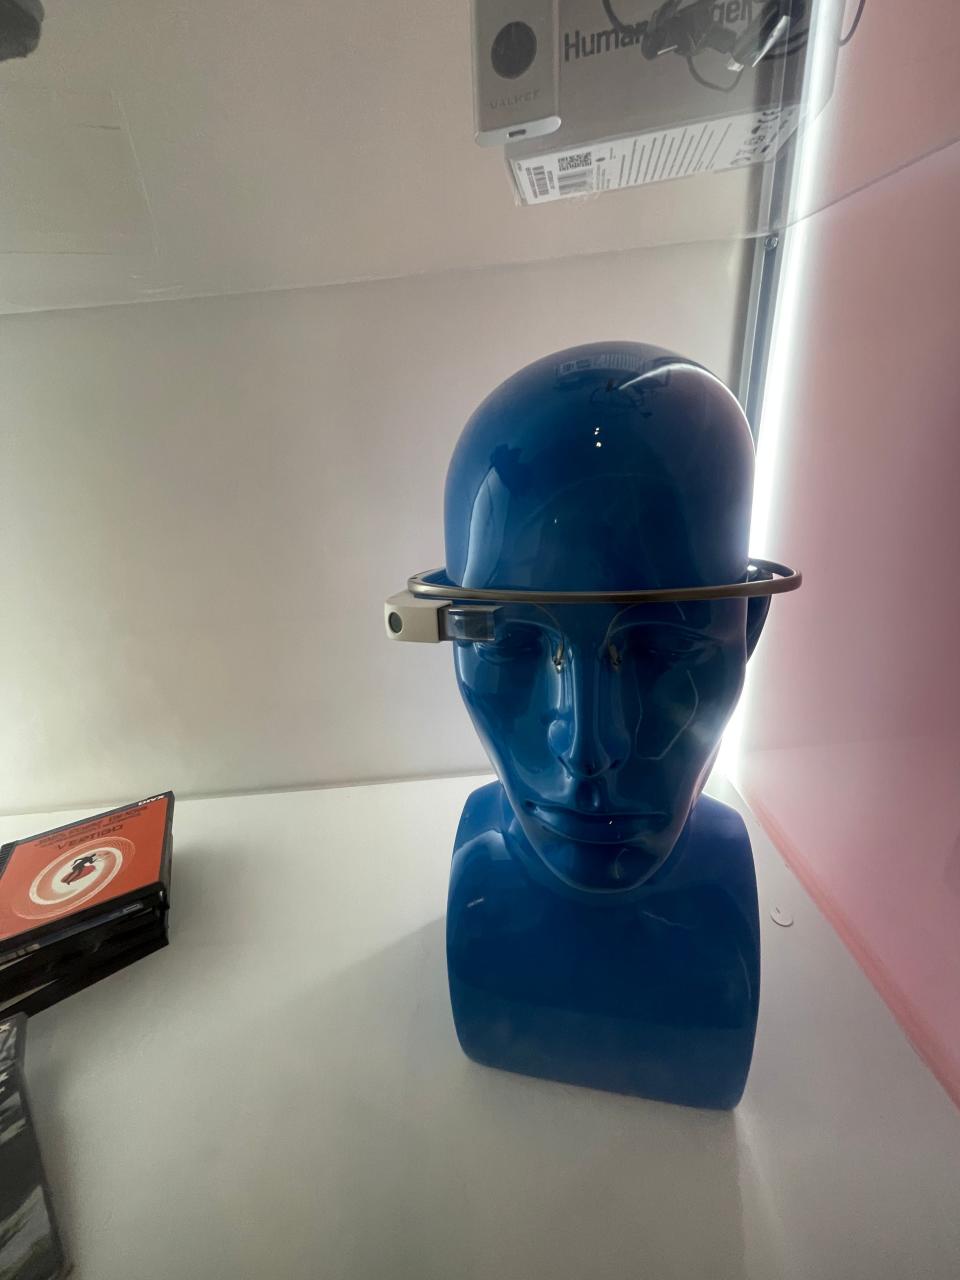 Google glass at the Museum of Failure